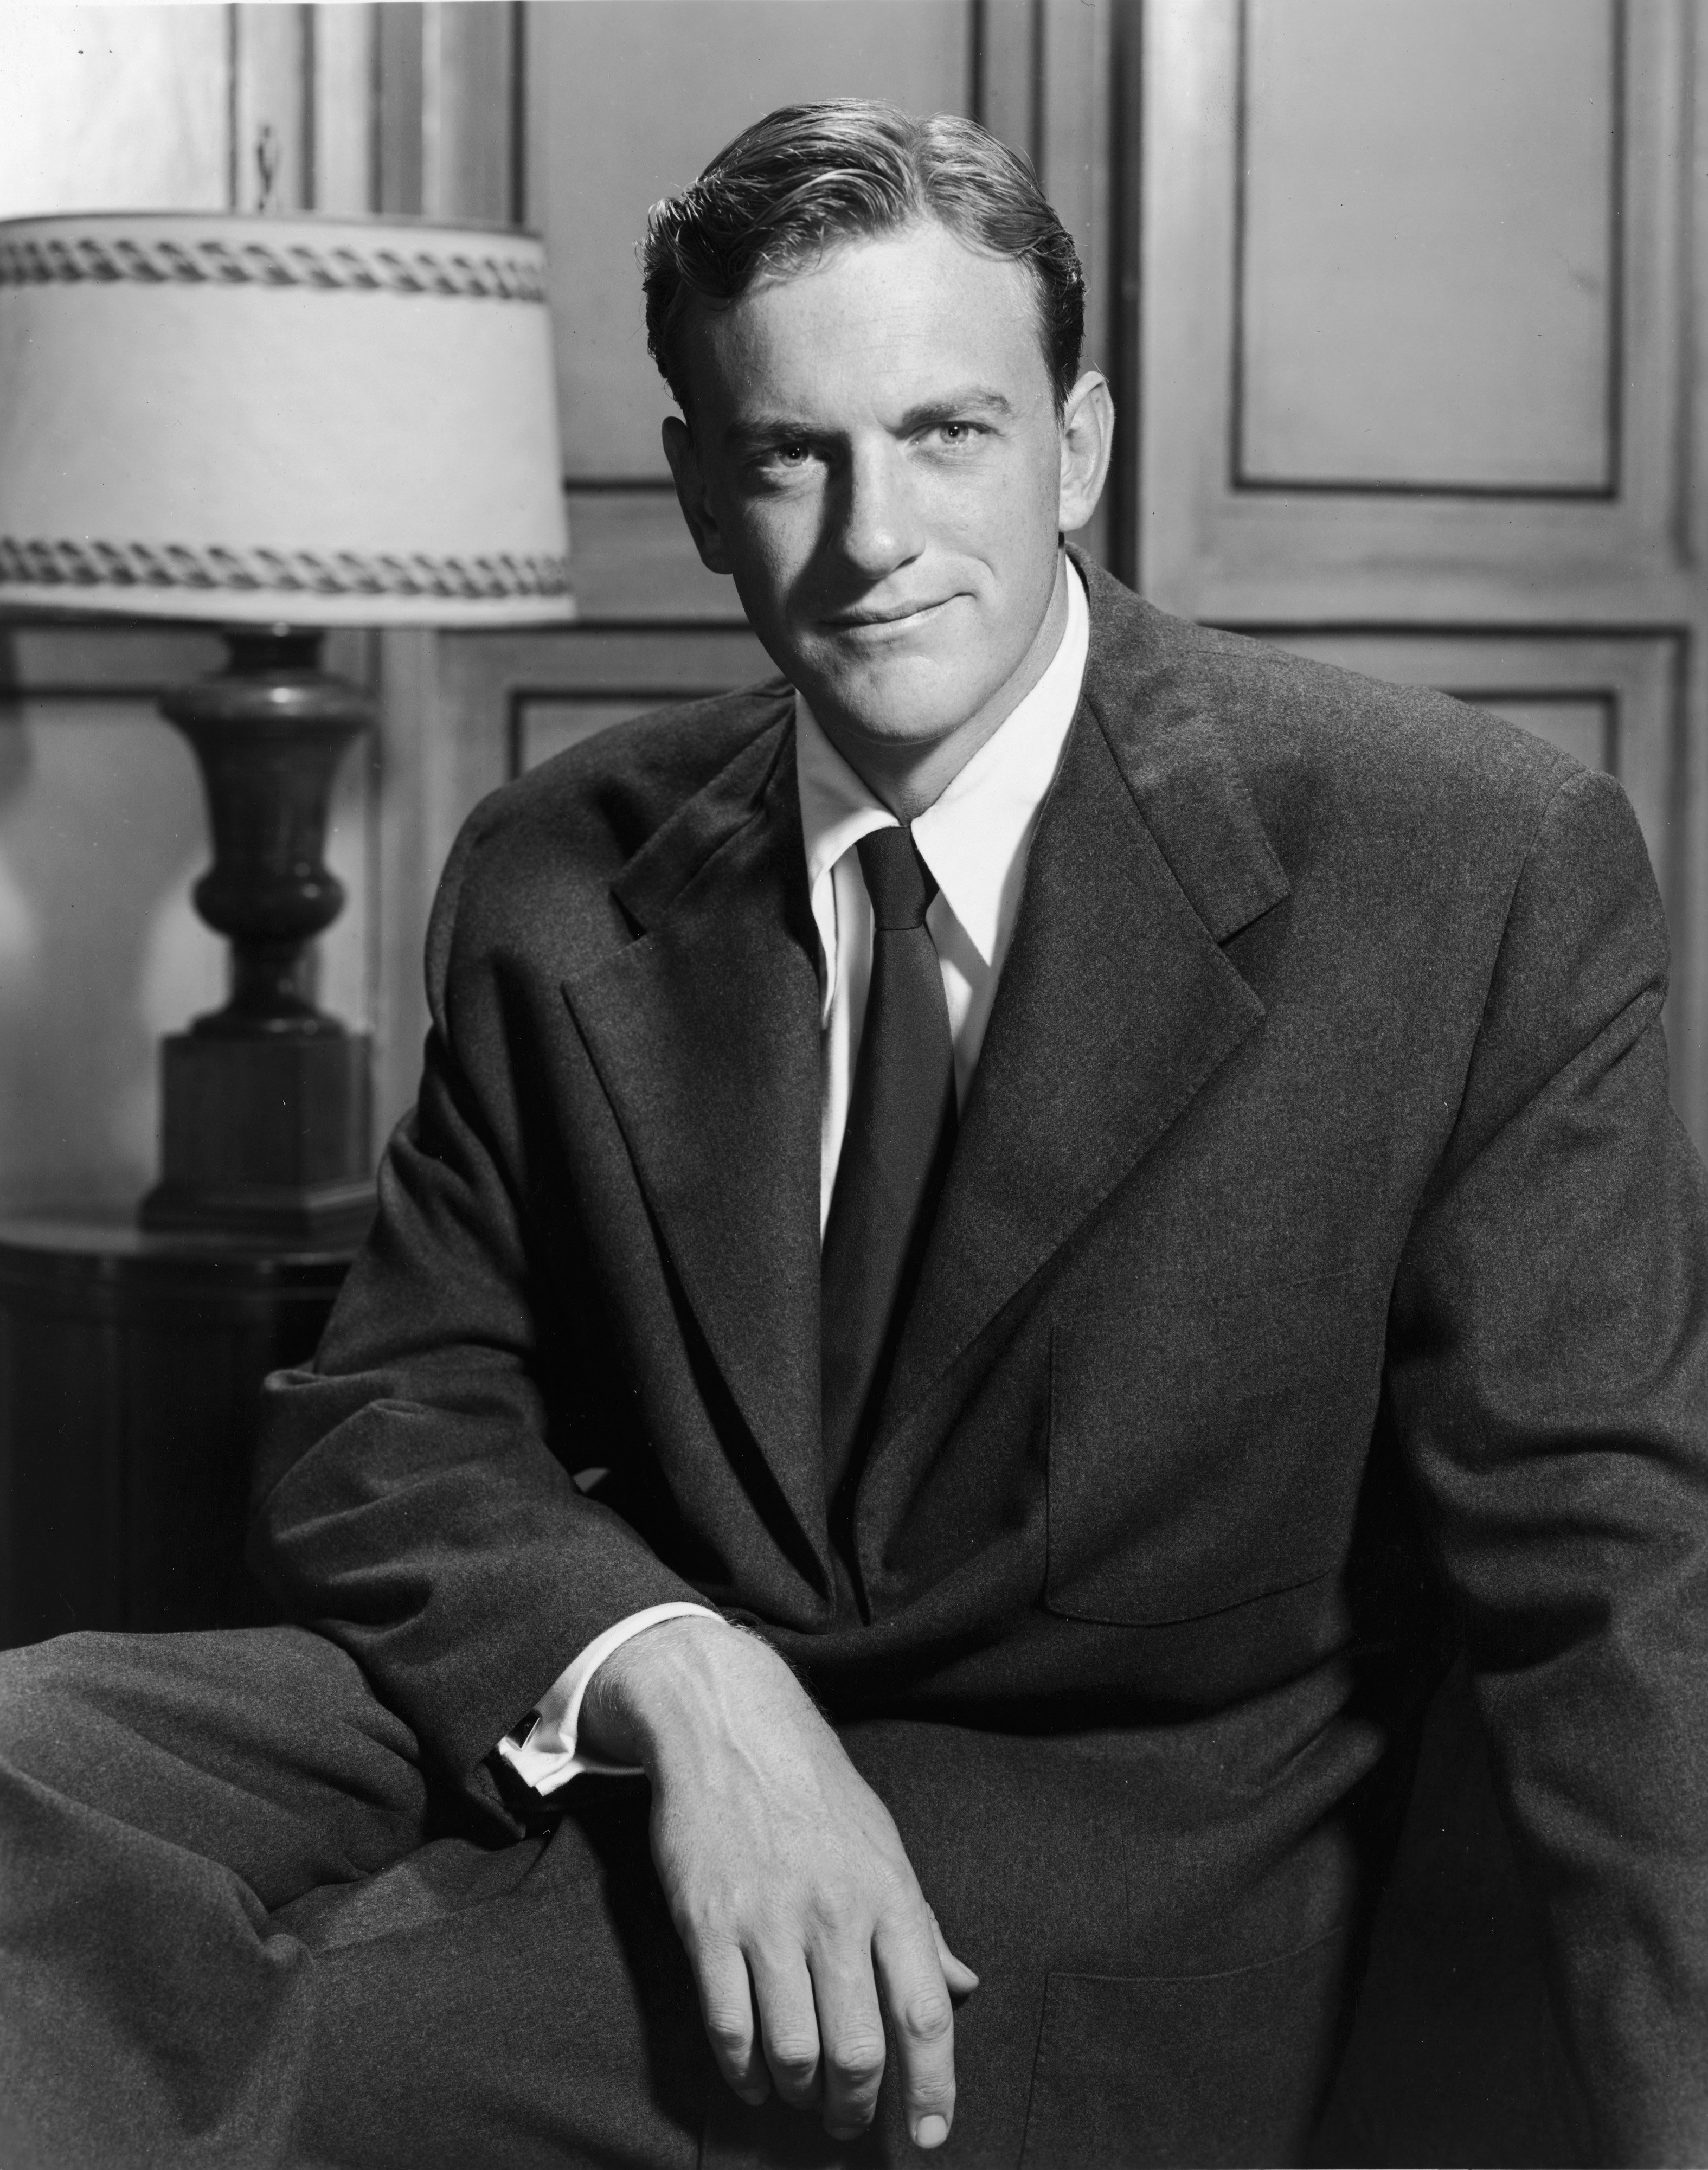 Promotional portrait of American actor James Arness, 1950s. | Photo: Getty Images